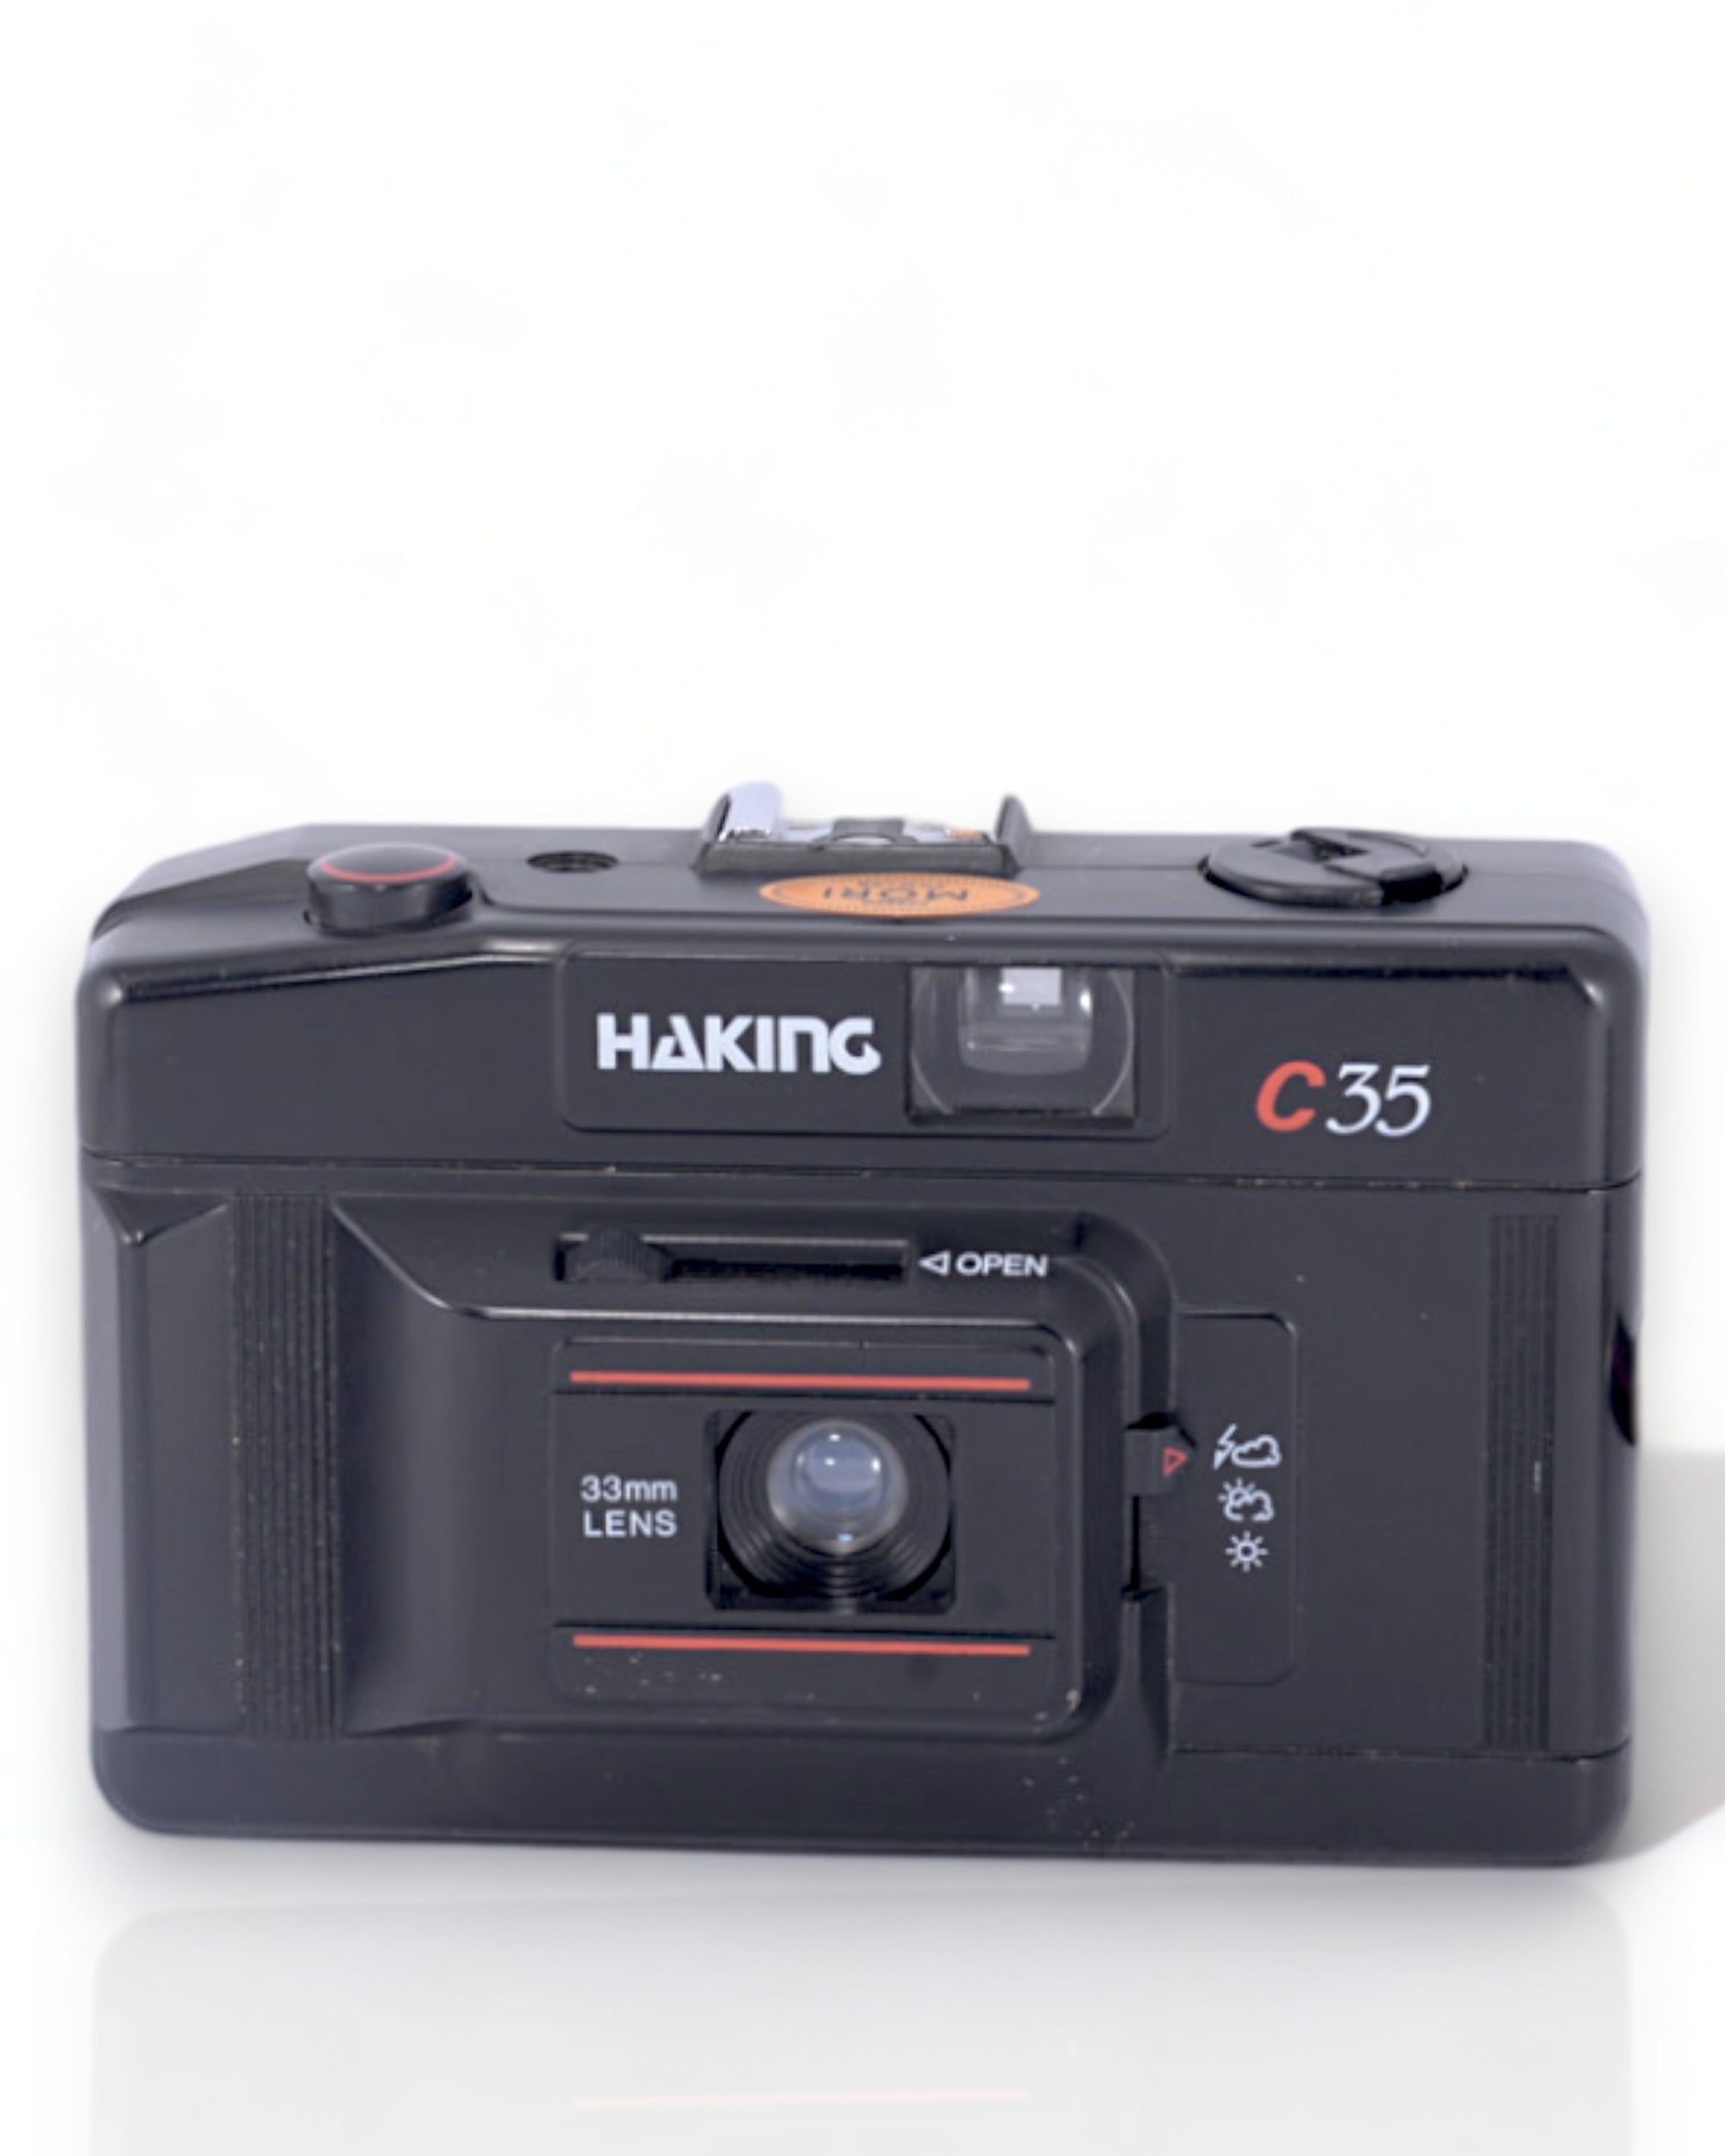 Haking C35 35mm Point & Shoot Film Camera with 33mm lens